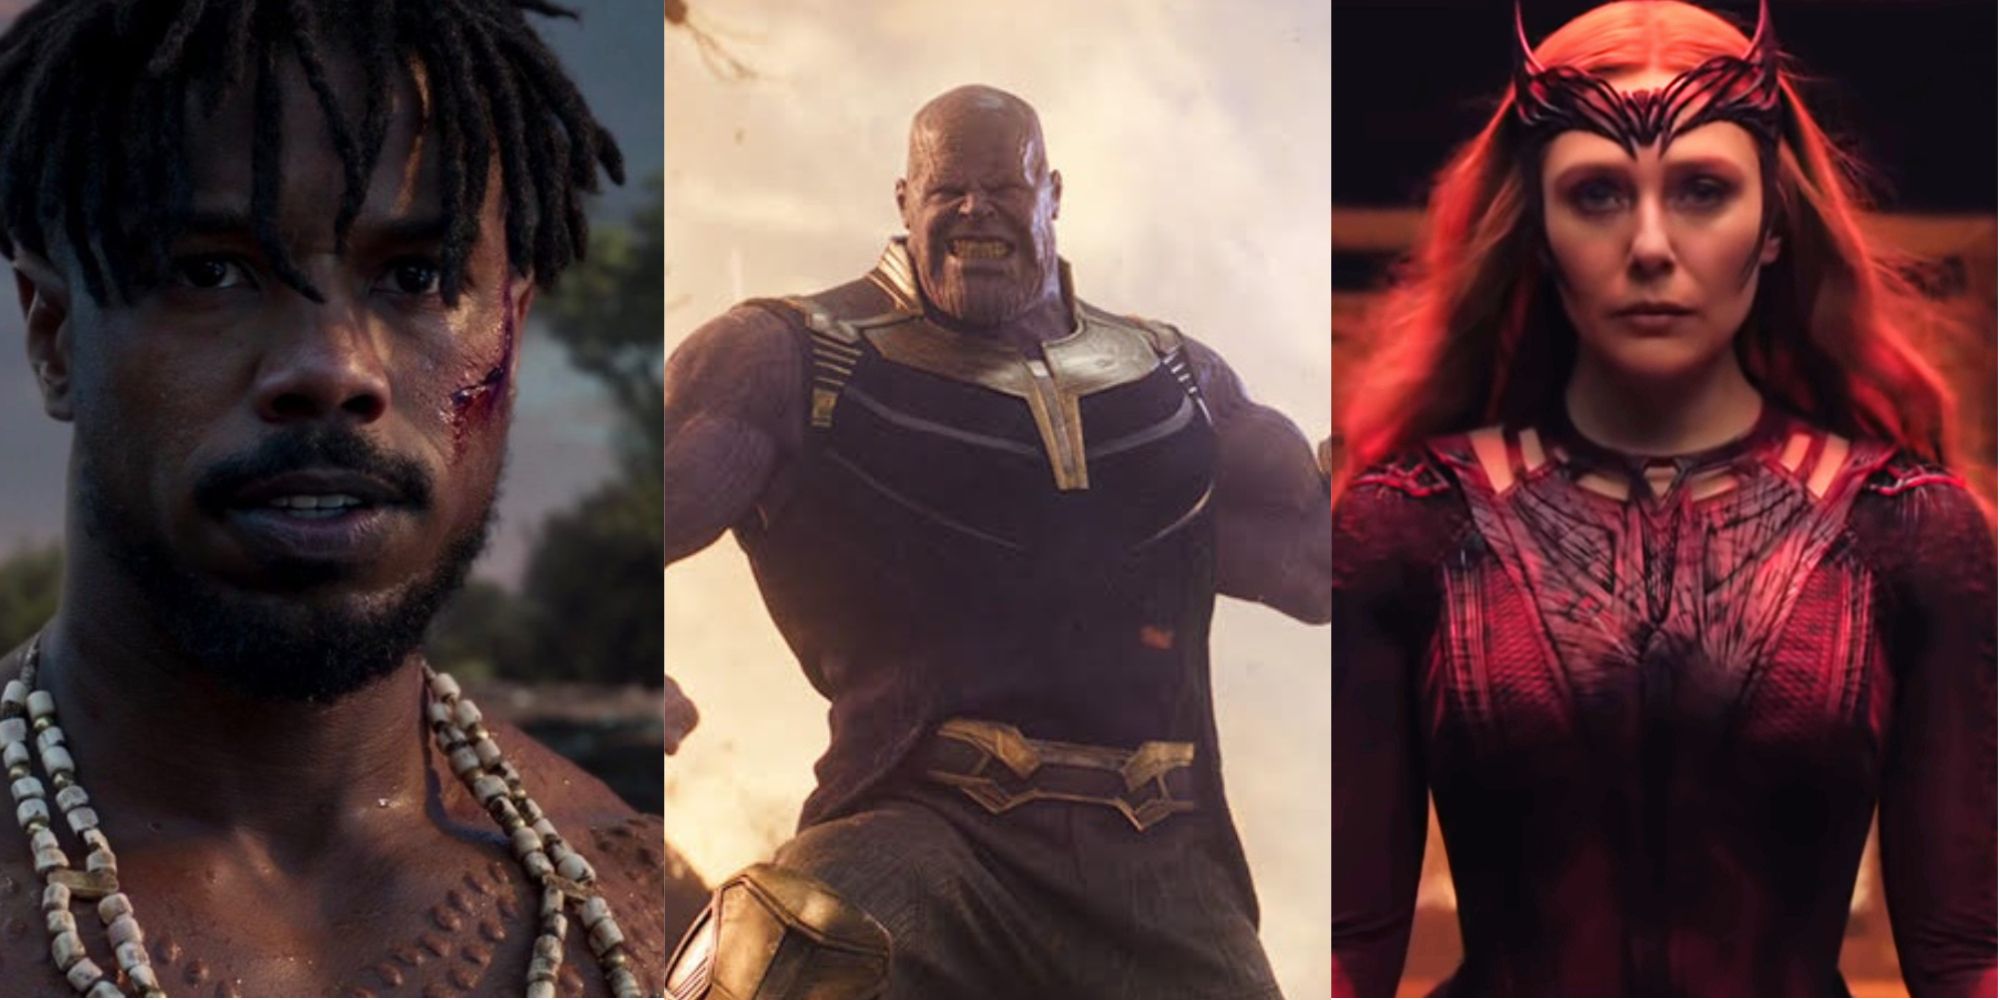 Split images of Erik Killmonger, Thanos, and Scarlet Witch in the Marvel Cinematic Universe